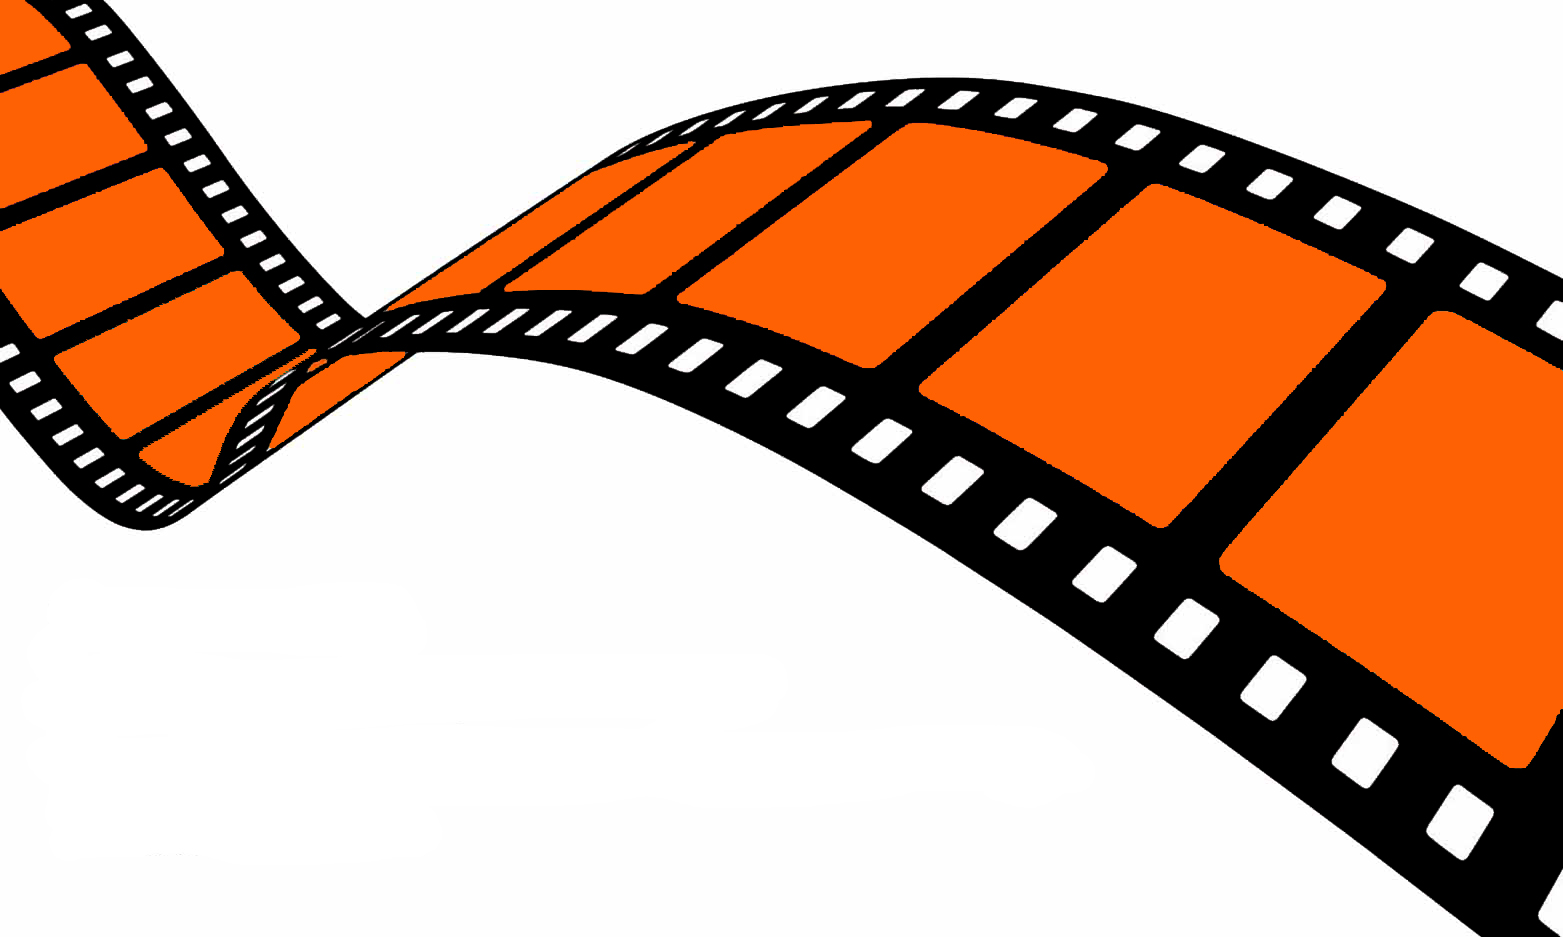 Image of a film real in black and range on a white background.